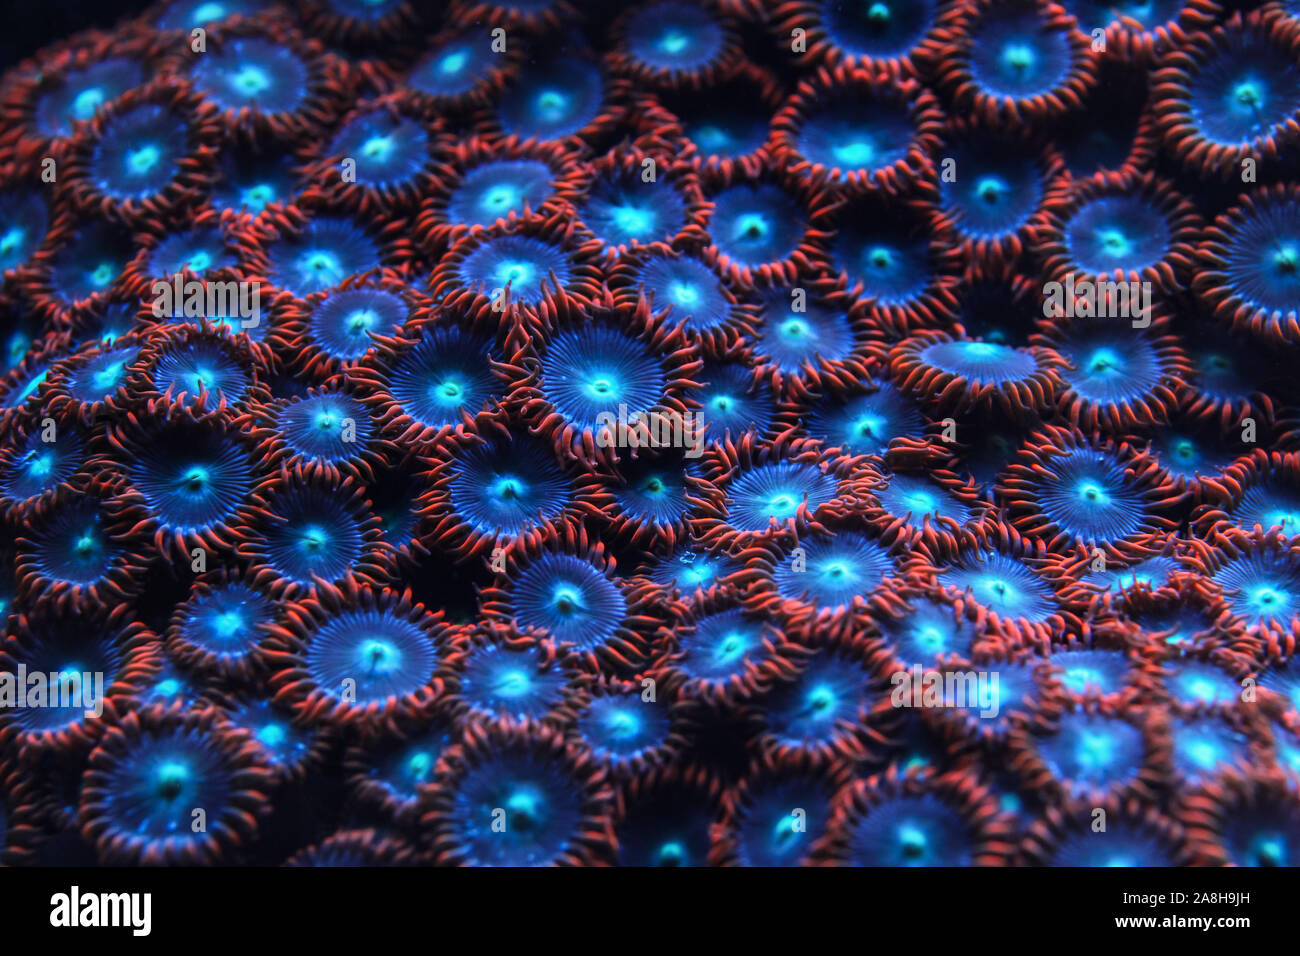 Underwater photo - red and blue flower like corals emitting light under UV bulb, abstract marine background. Stock Photo